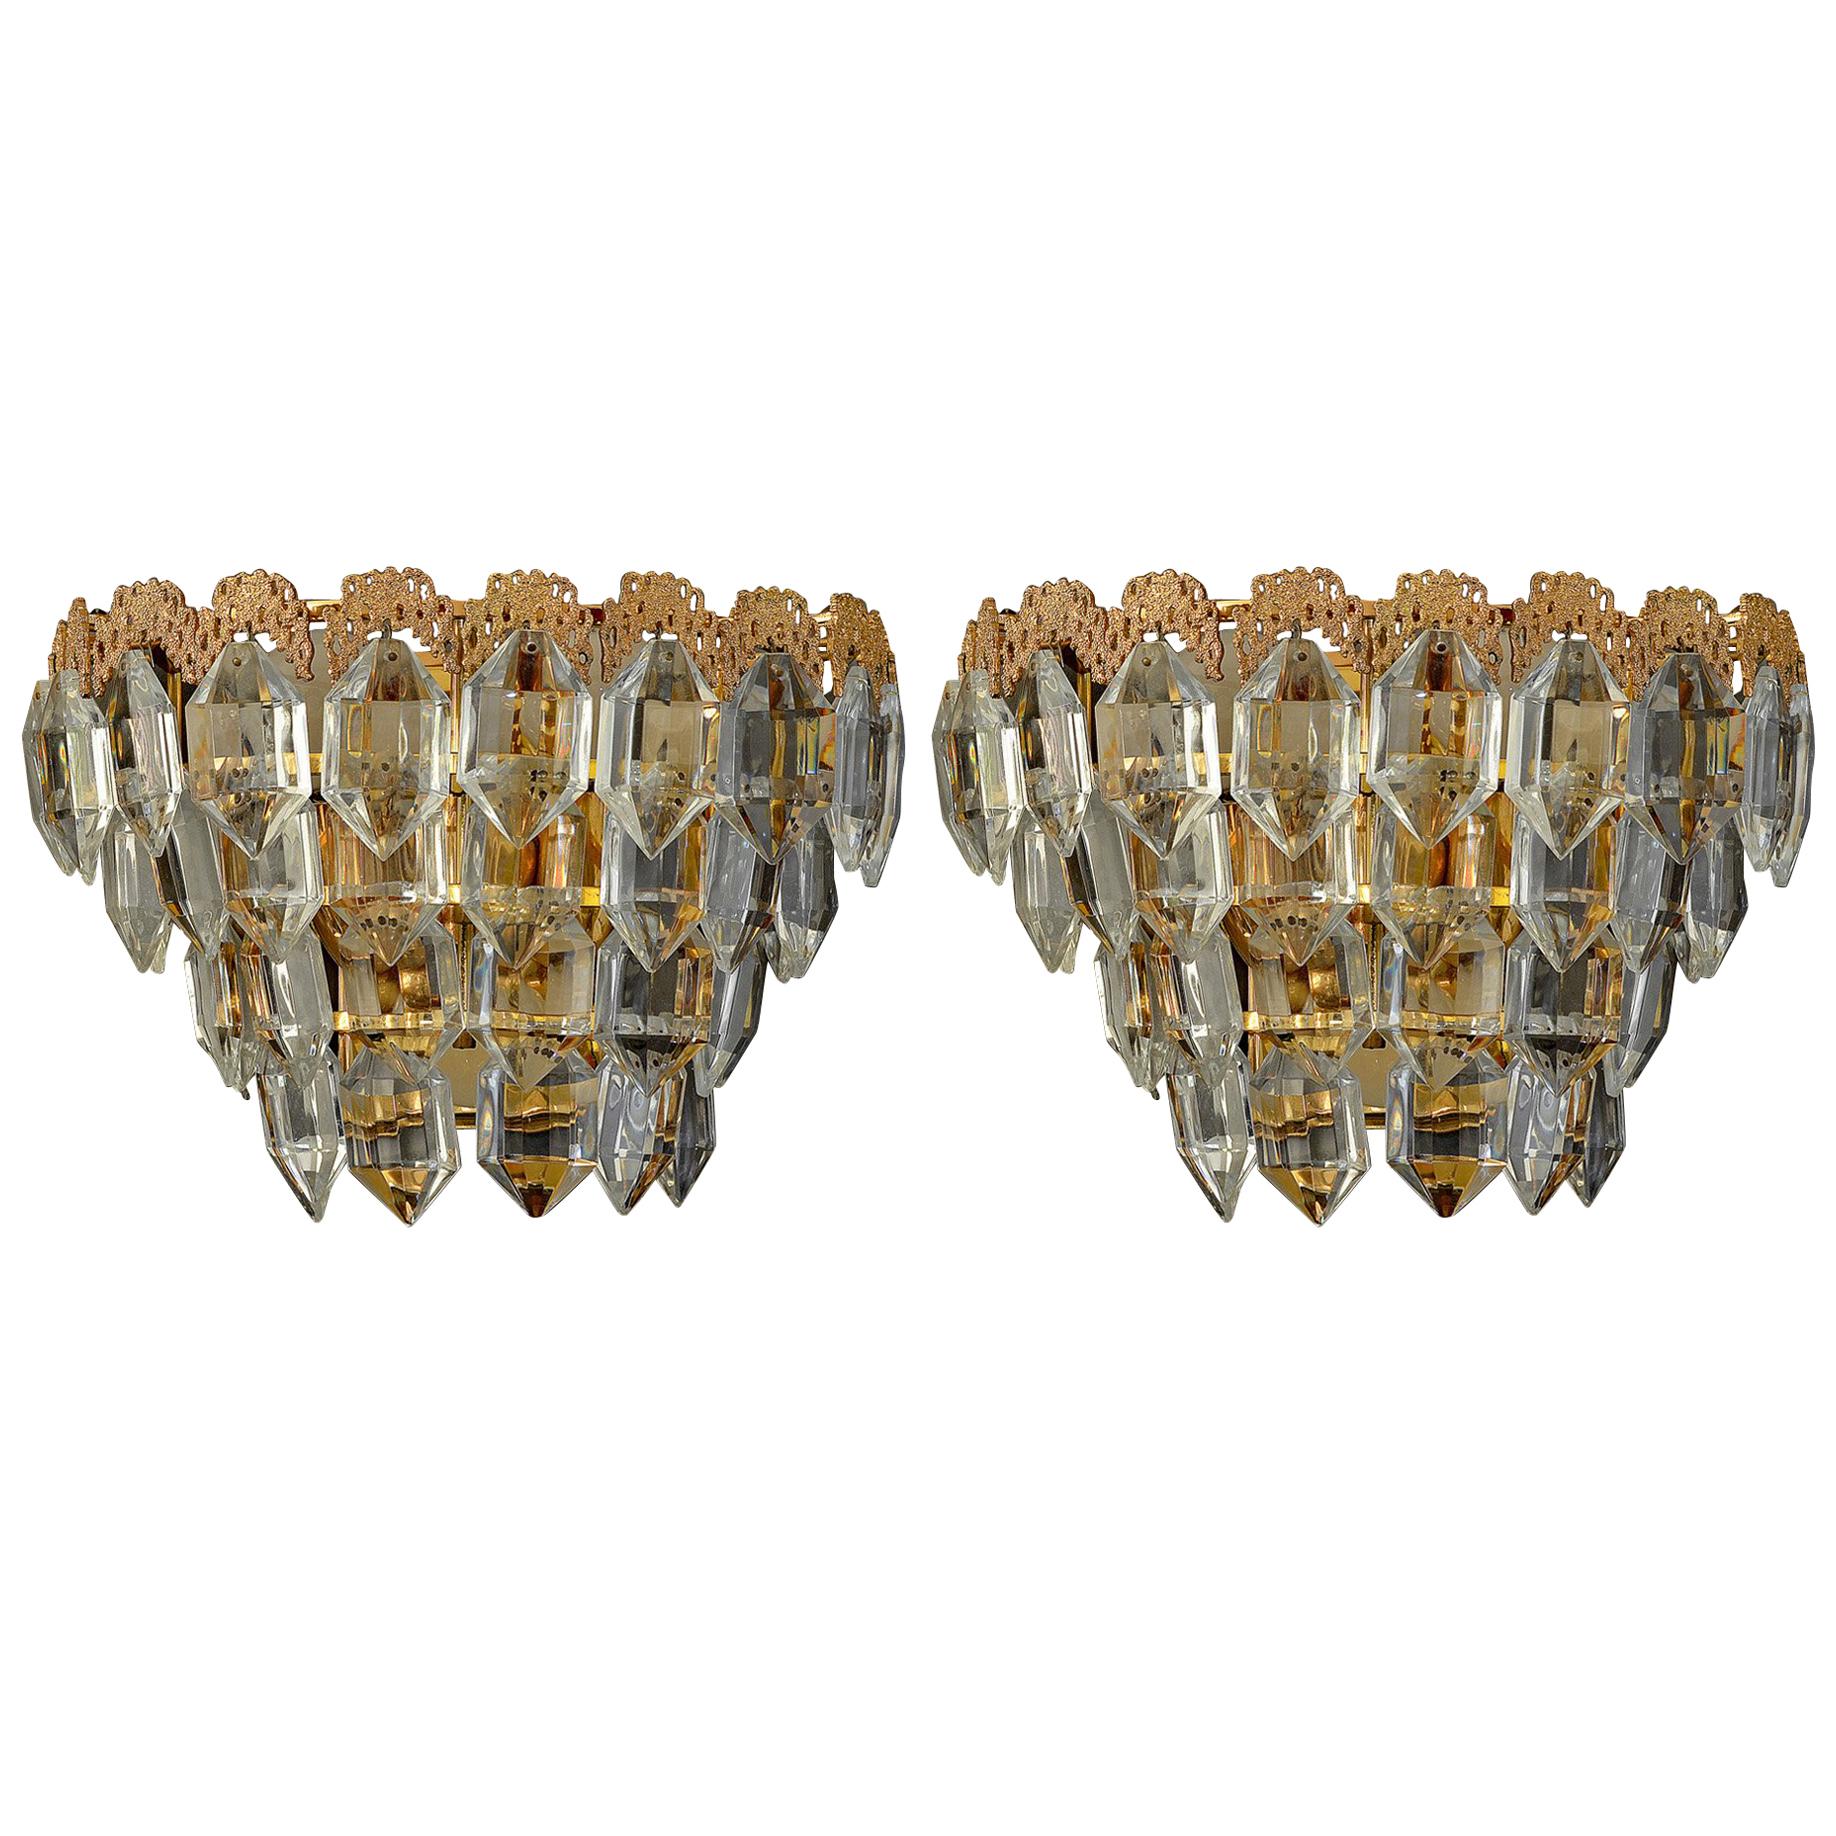 Pair of Sconces from Bakalowits, Austria 1960s, Gilt Brass and Faceted Glass